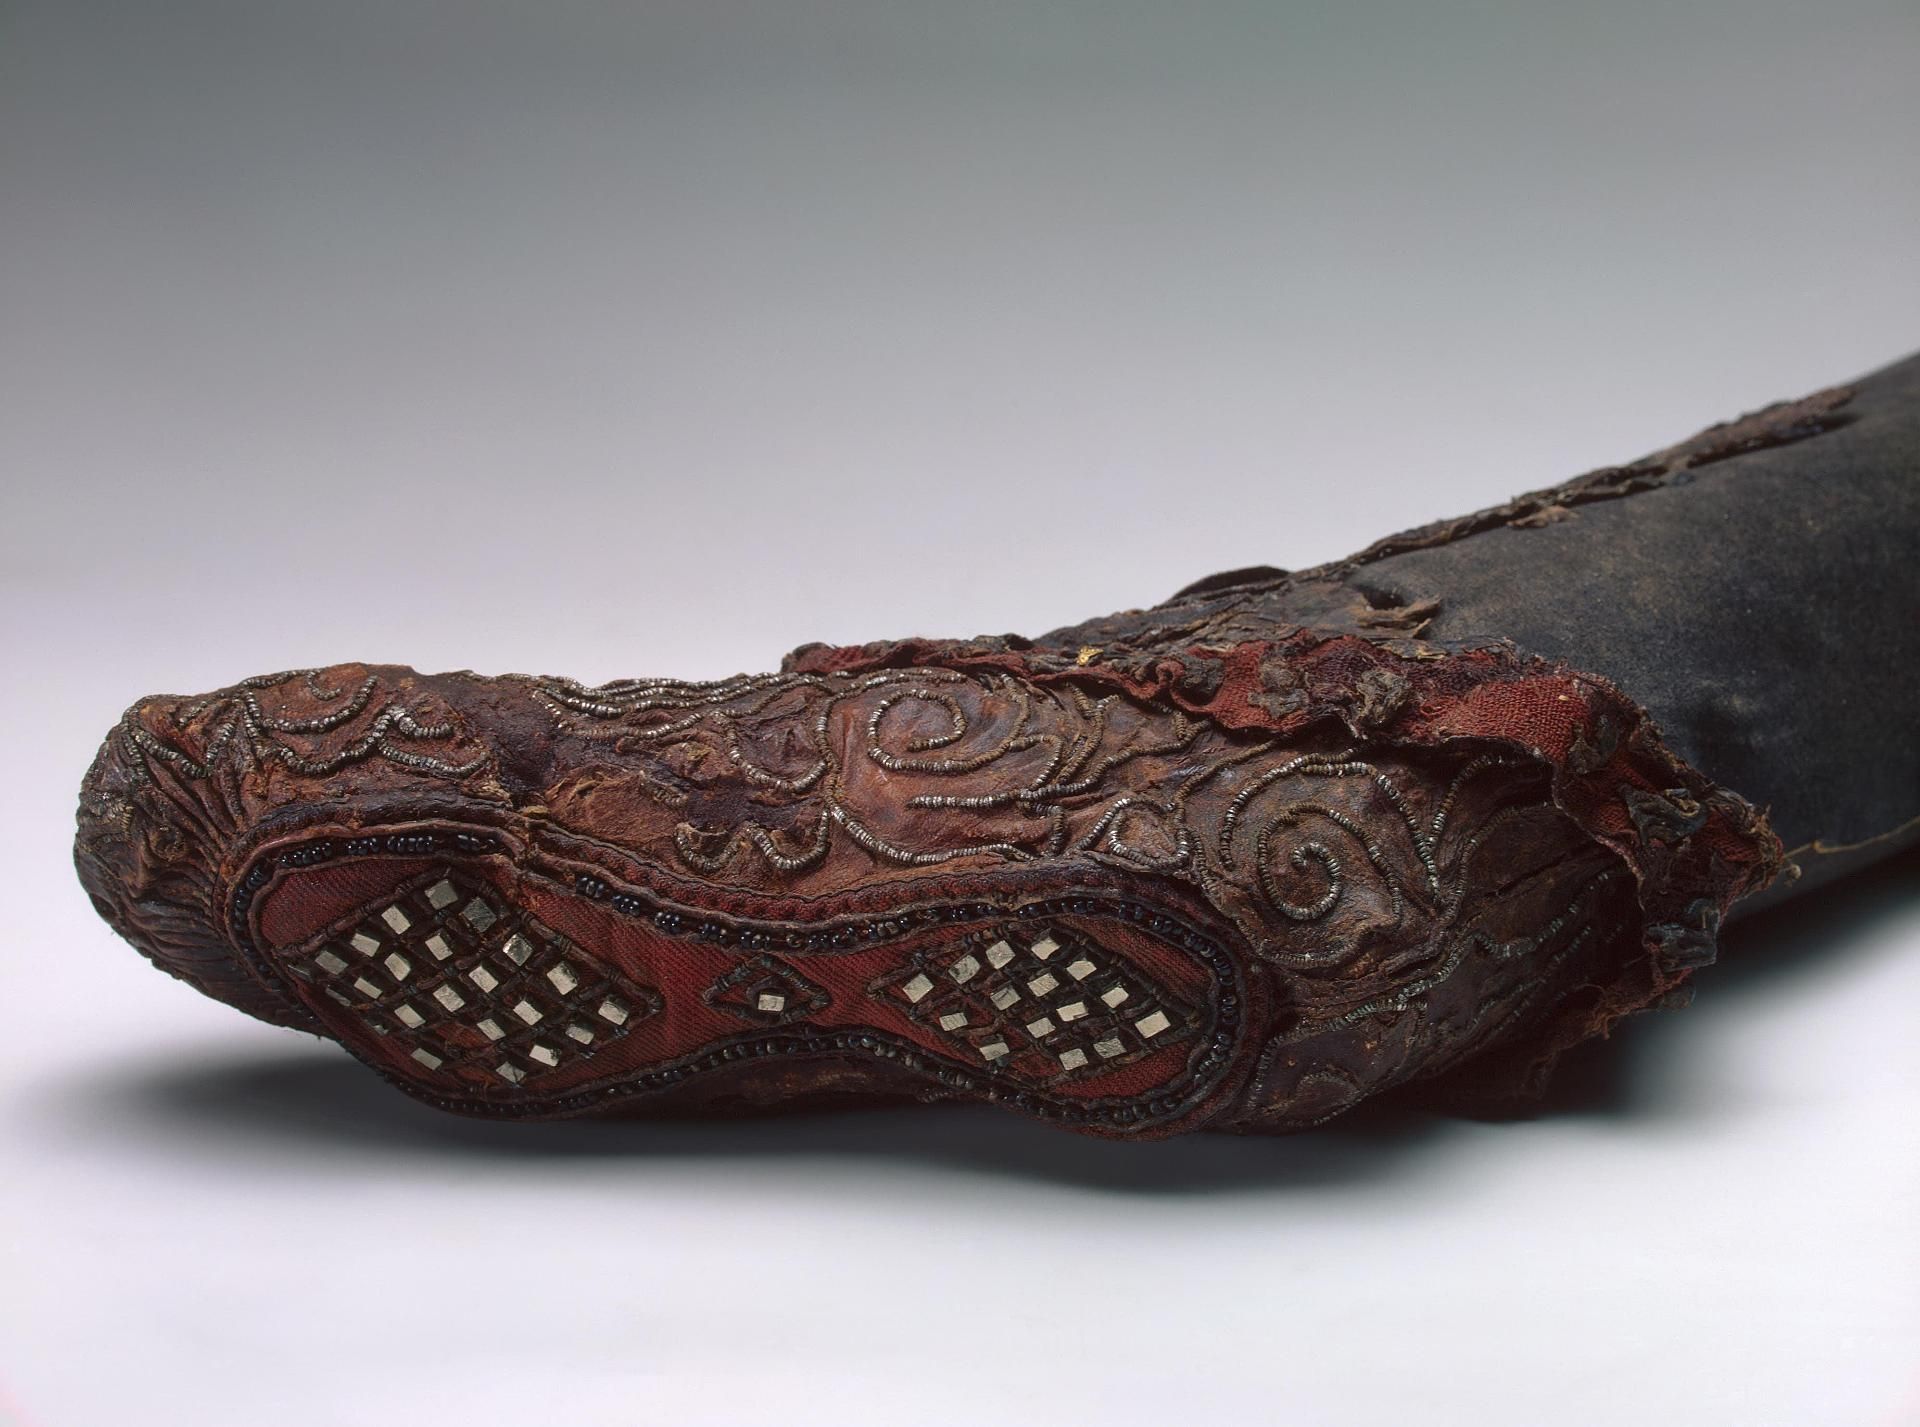 Magnificent 2300-Year-Old Scythian Woman's Boot Discovered in the Altai  Mountains | Iron age, Boots, Altai mountains